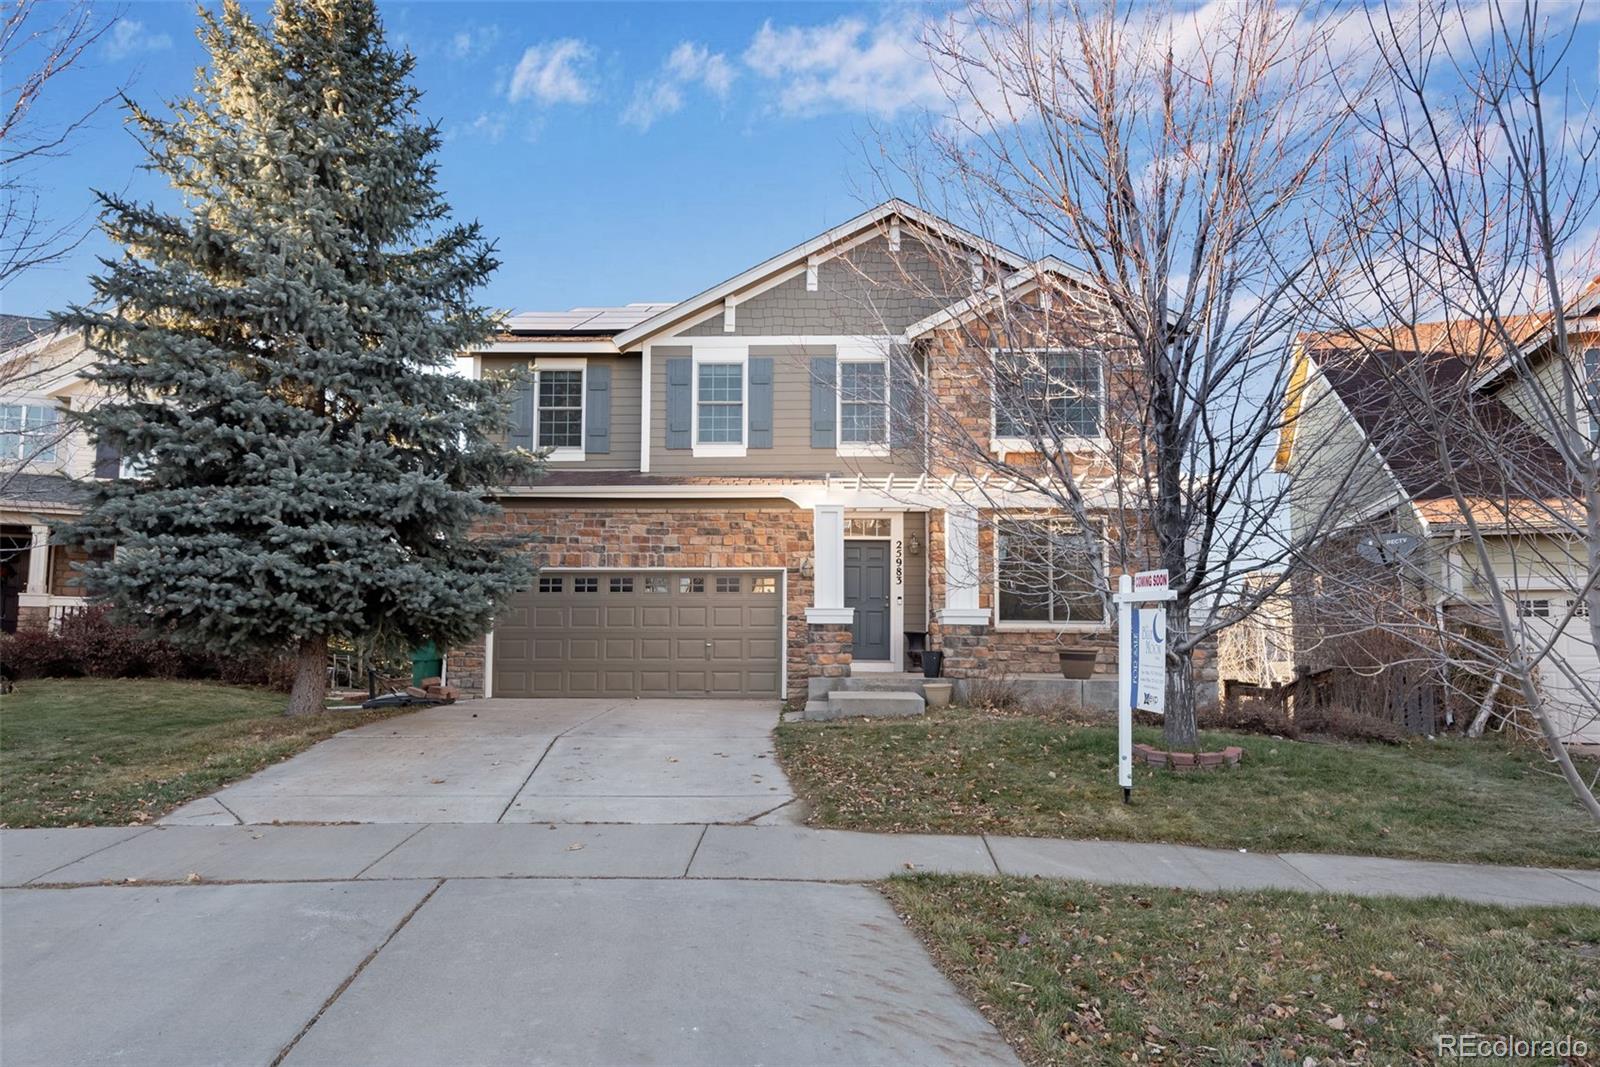 25983 e geddes circle, aurora sold home. Closed on 2024-01-31 for $633,000.